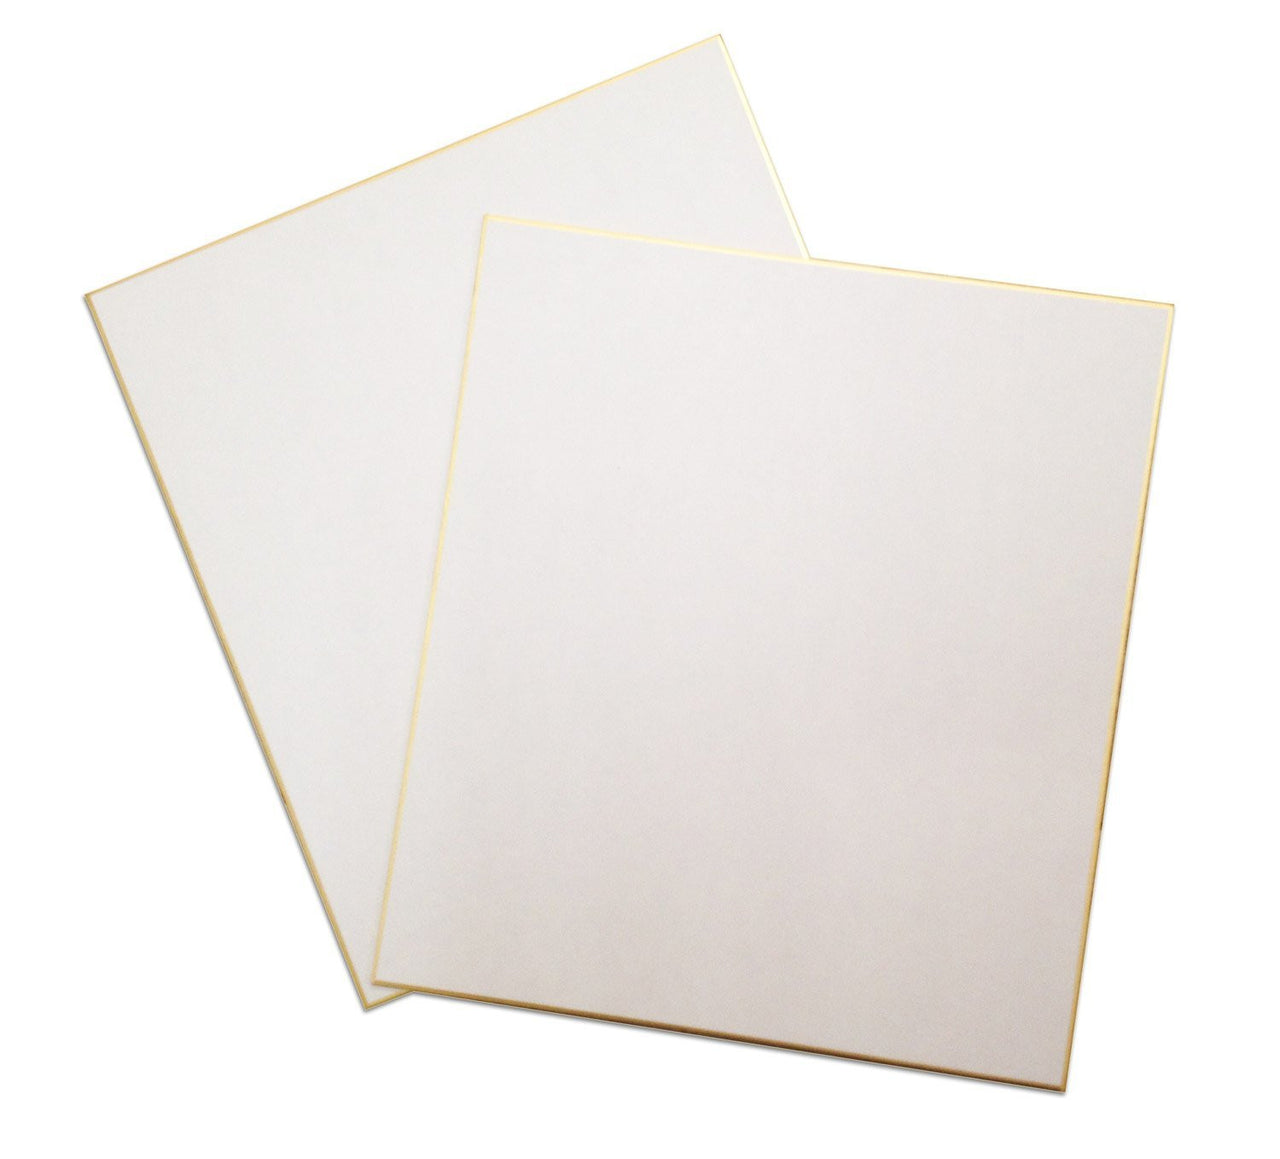 Japan Art Shikishi Board 9.5 x 10.75" Gold Bordered for Japanese Art or Calligraphy (Pack of 50) - The Japan Shop